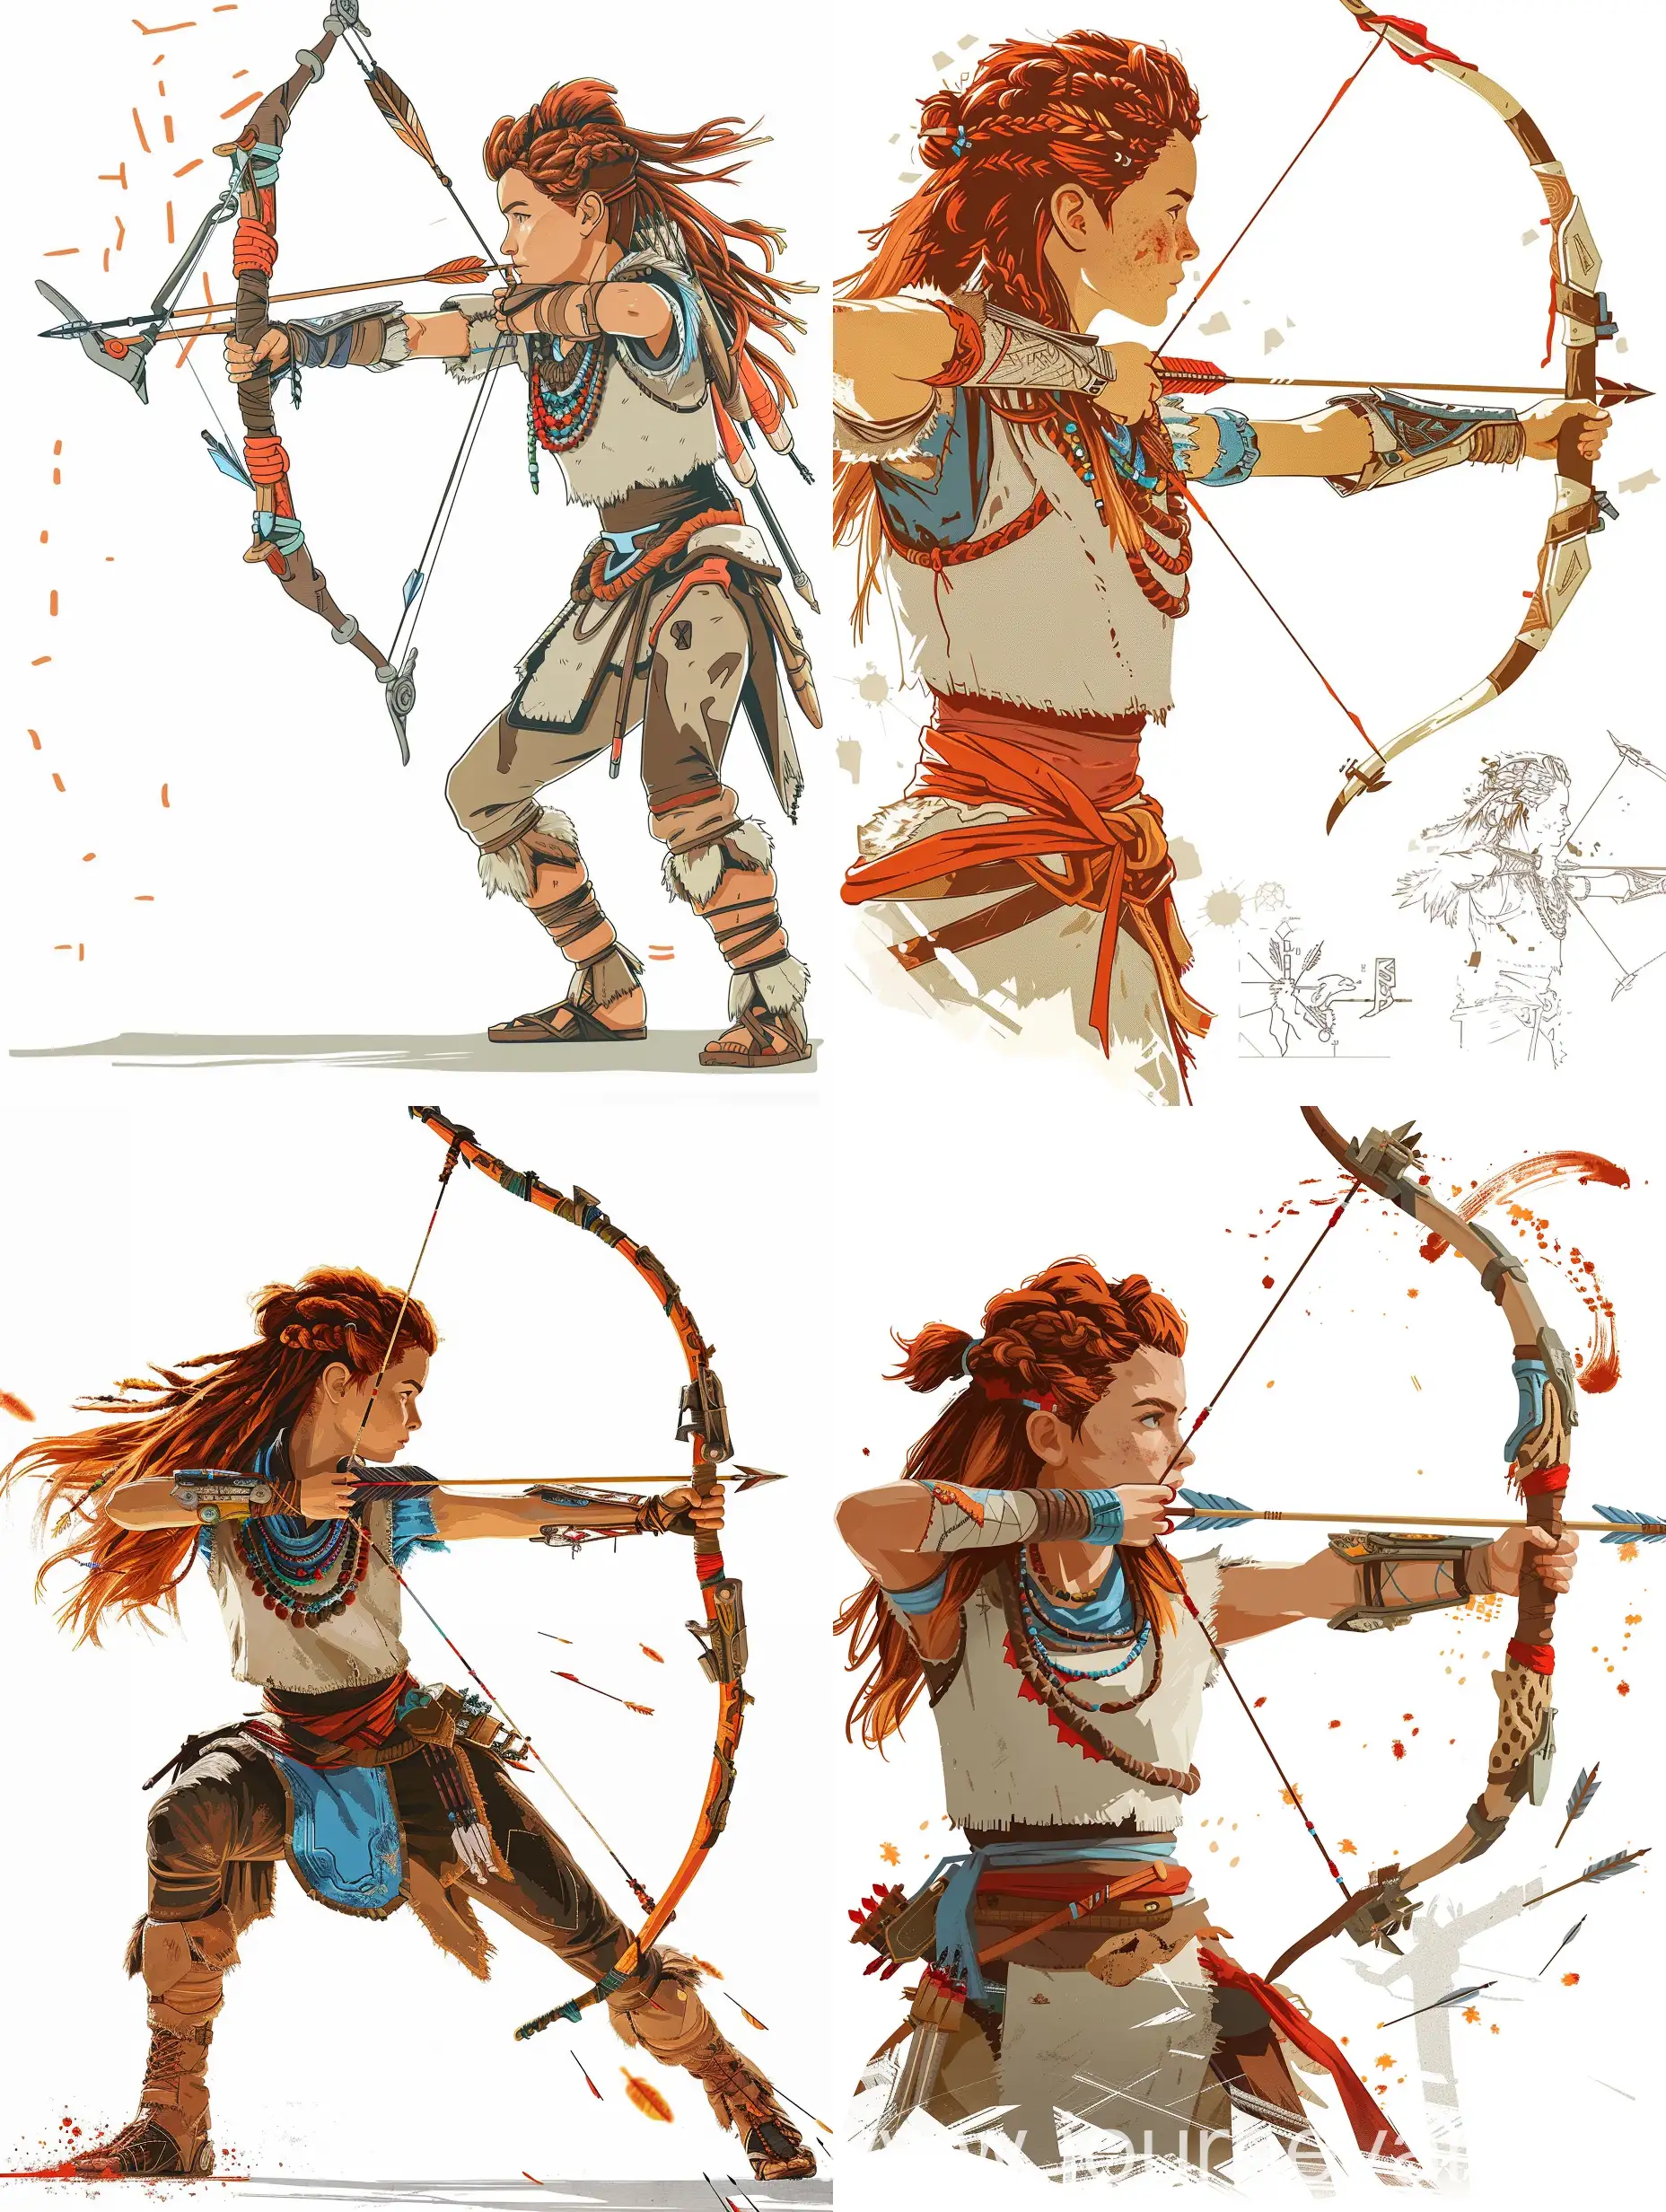 RedHaired-Girl-Warrior-in-Aloys-Style-Shooting-Arrows-for-2D-Platformer-Game